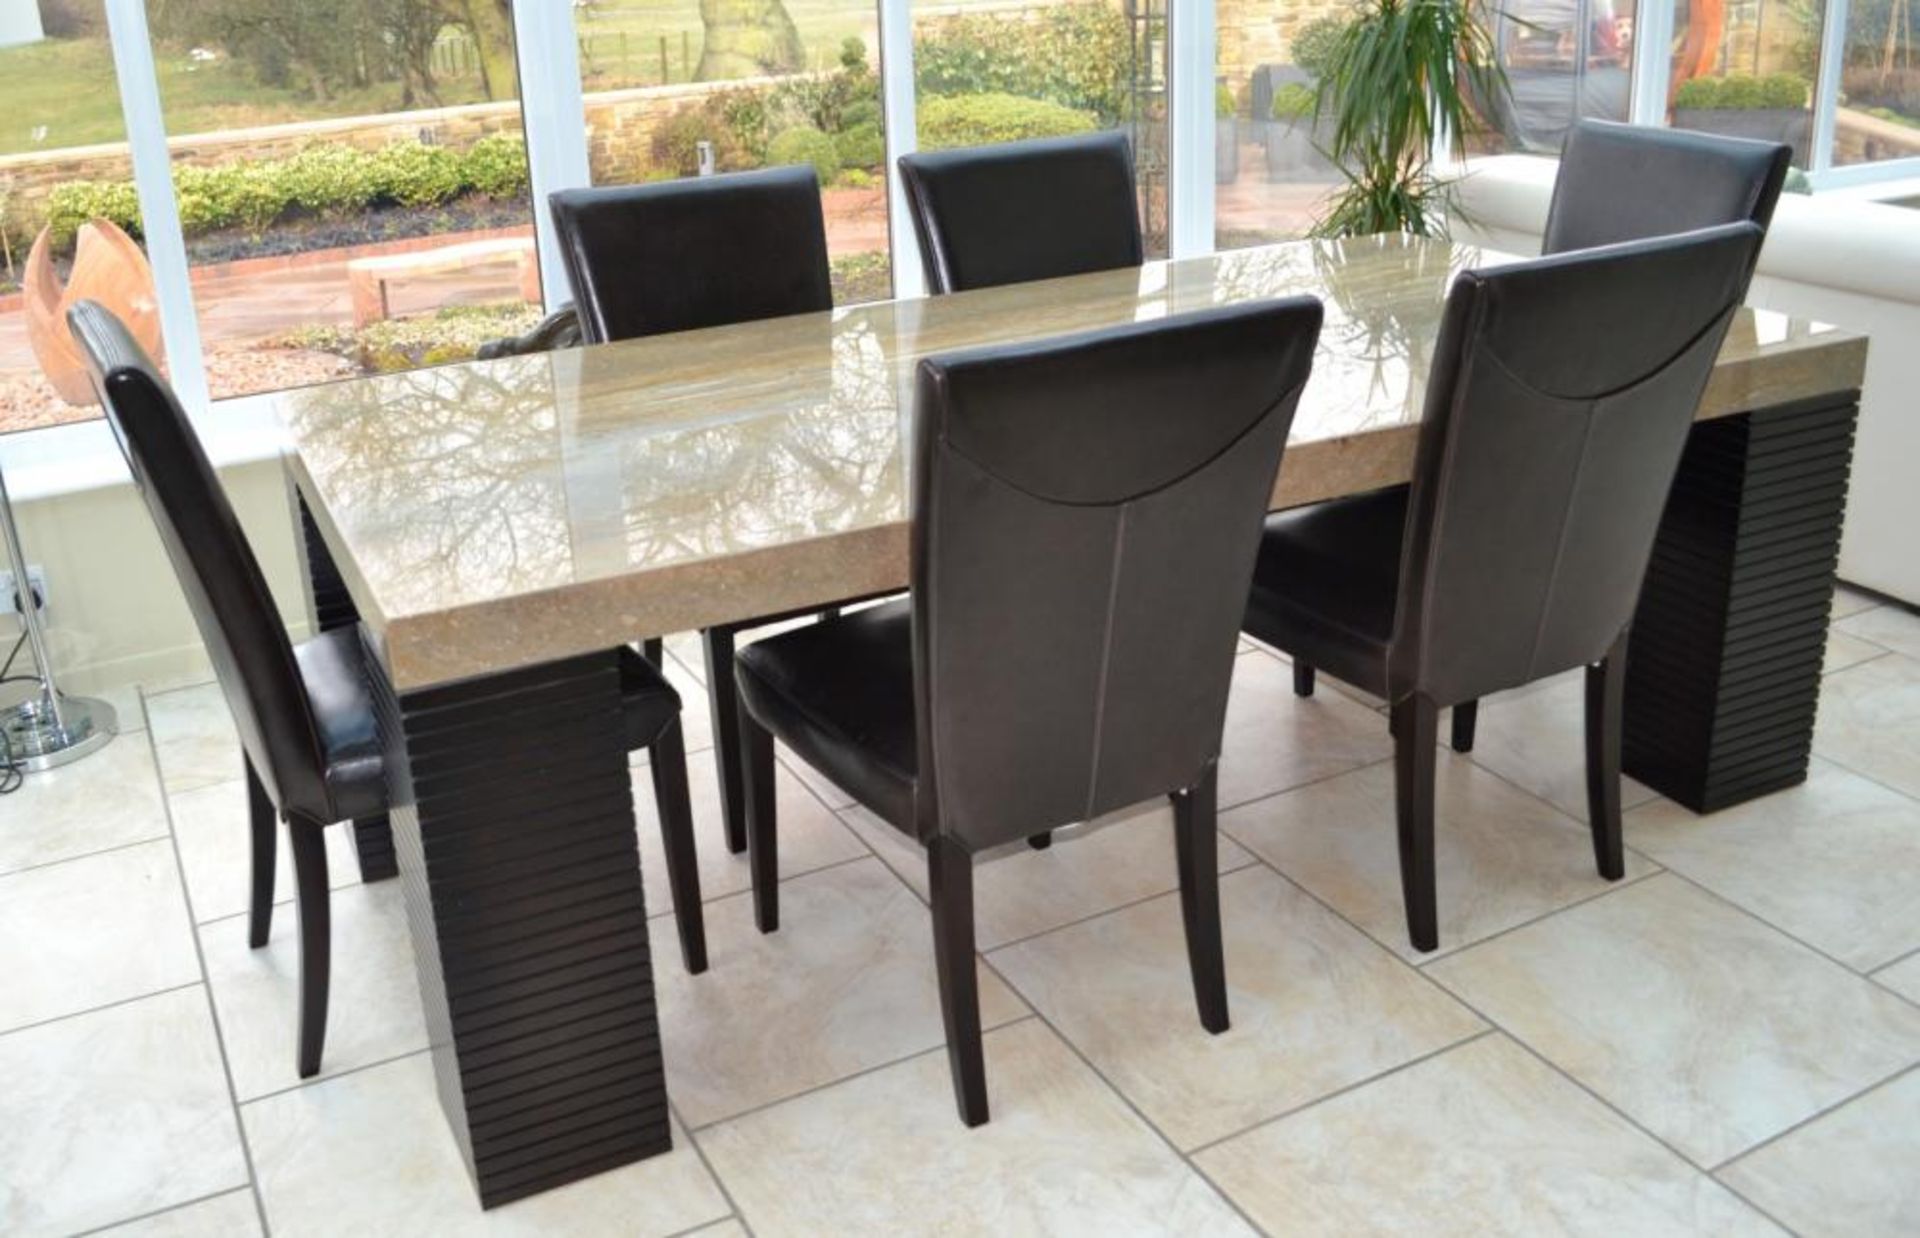 1 x Stone International Espresso Large Marble Top Dining Table With 8 Leather Dining Chairs - Excell - Image 2 of 16